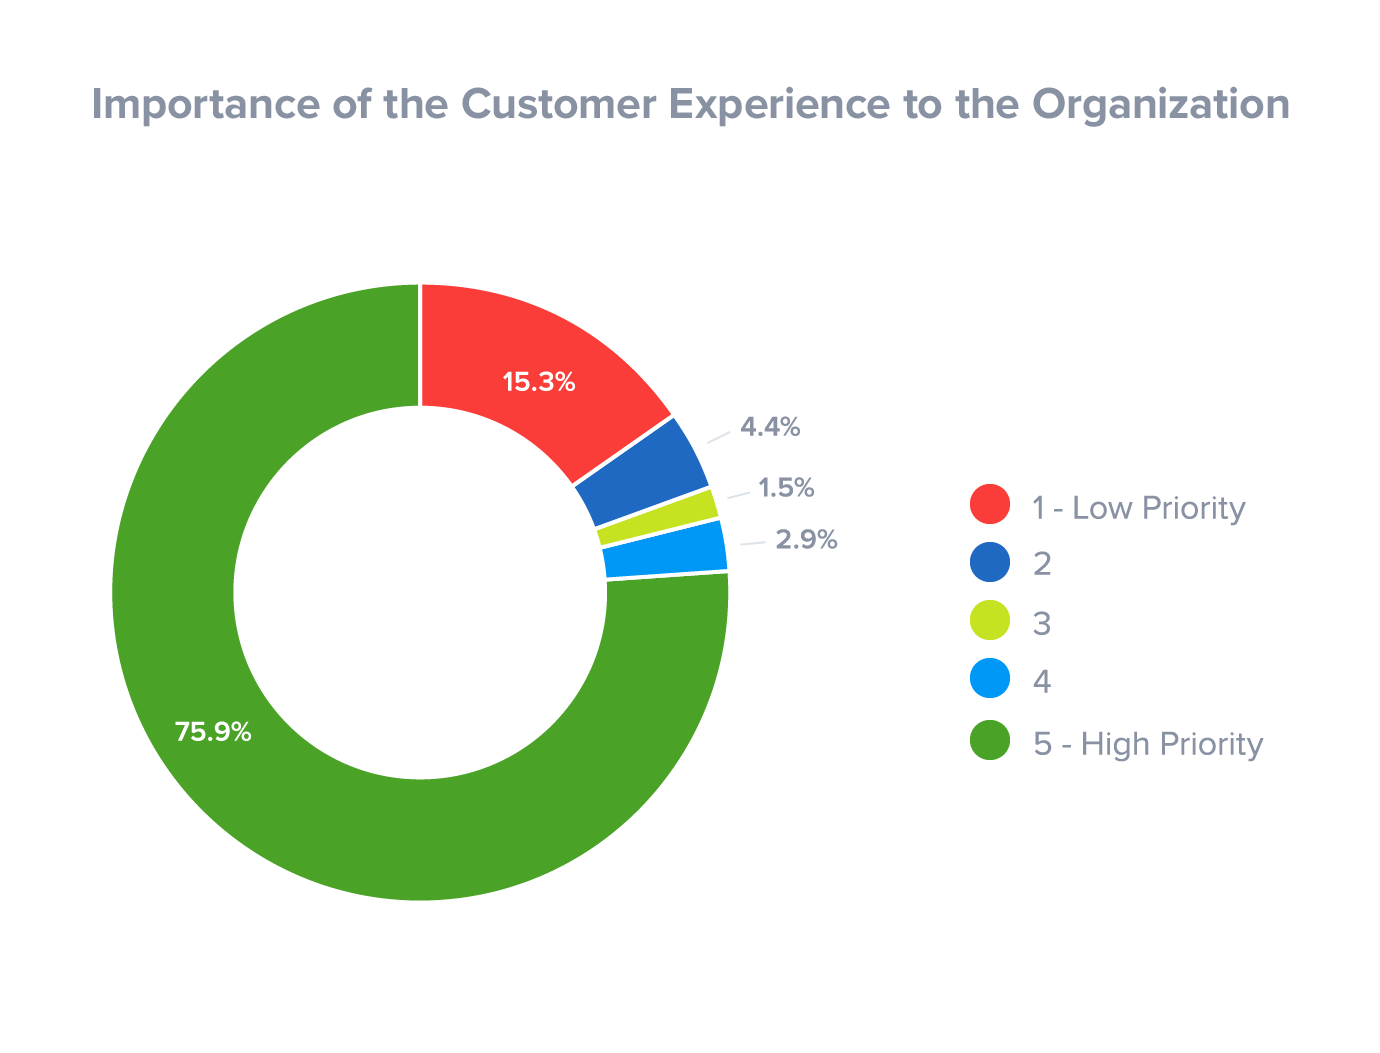 The importance of customer experience to organizations